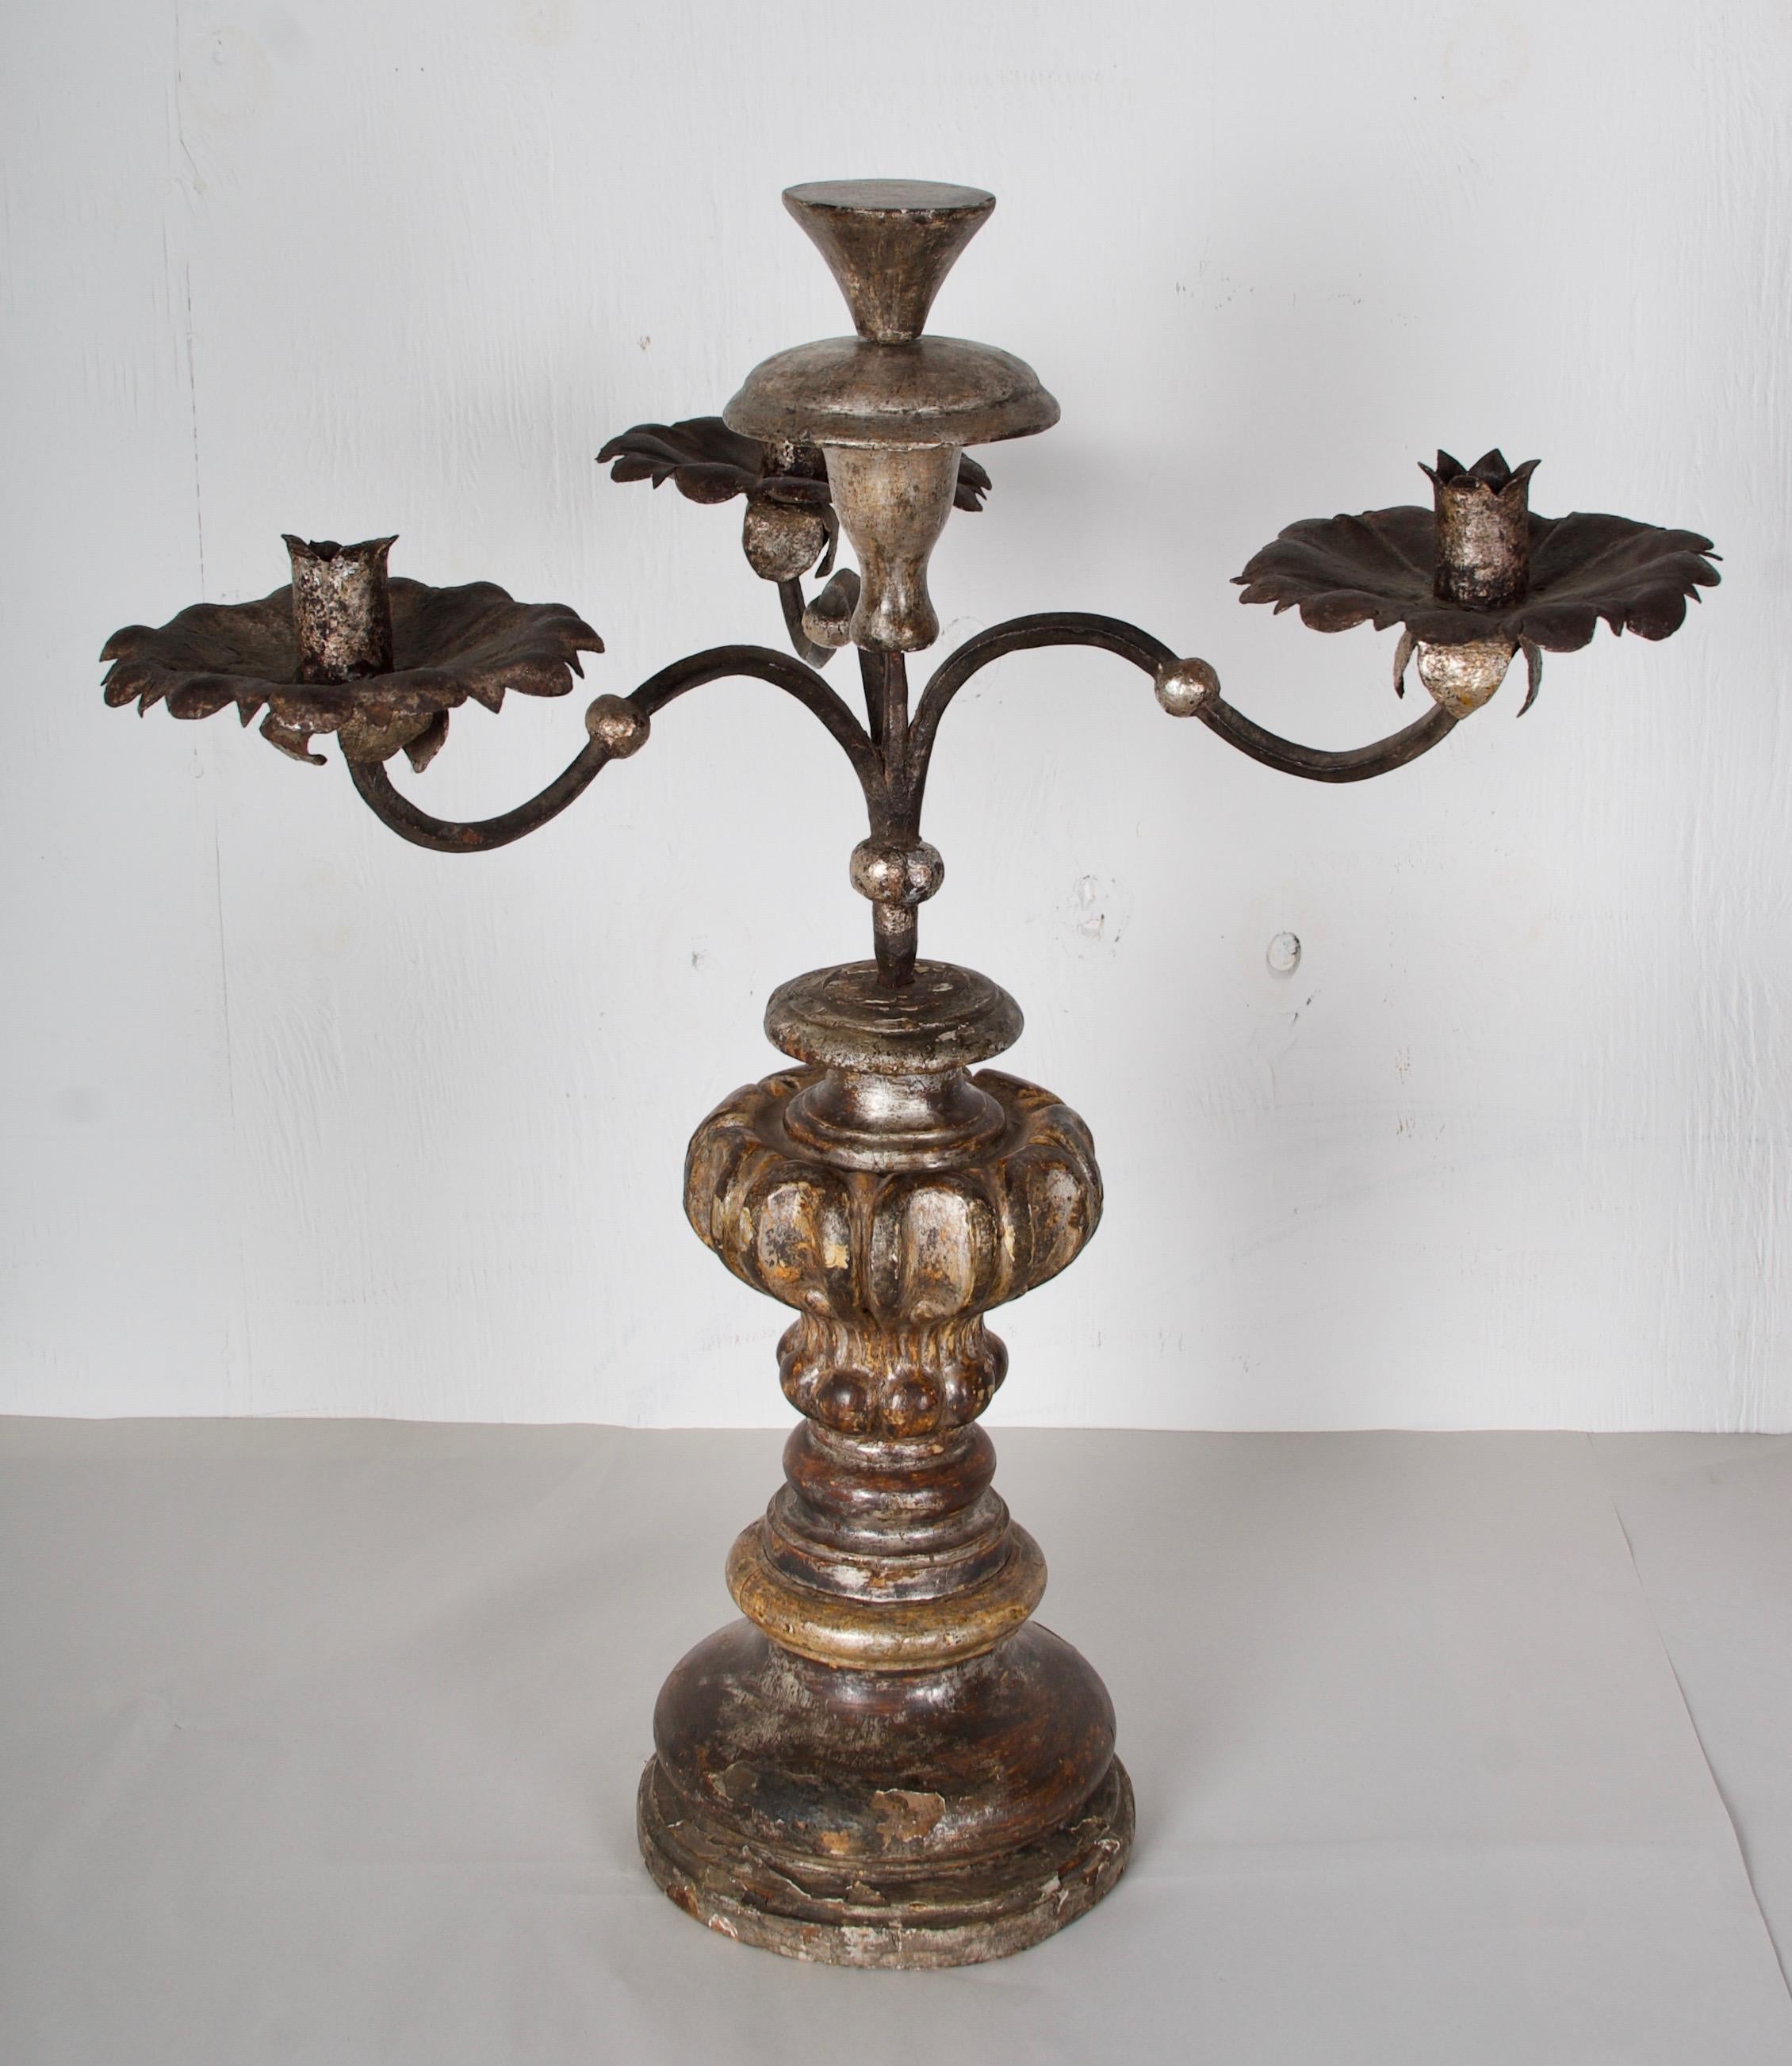 A wonderful pair of hand carved and gilded torcheres with handwrought iron
candle arms and bobeches. The candelabra portion lifts out of the wood base.
The base once was gilded in white gold, the ochre colored boule peaks thru the
traces of white